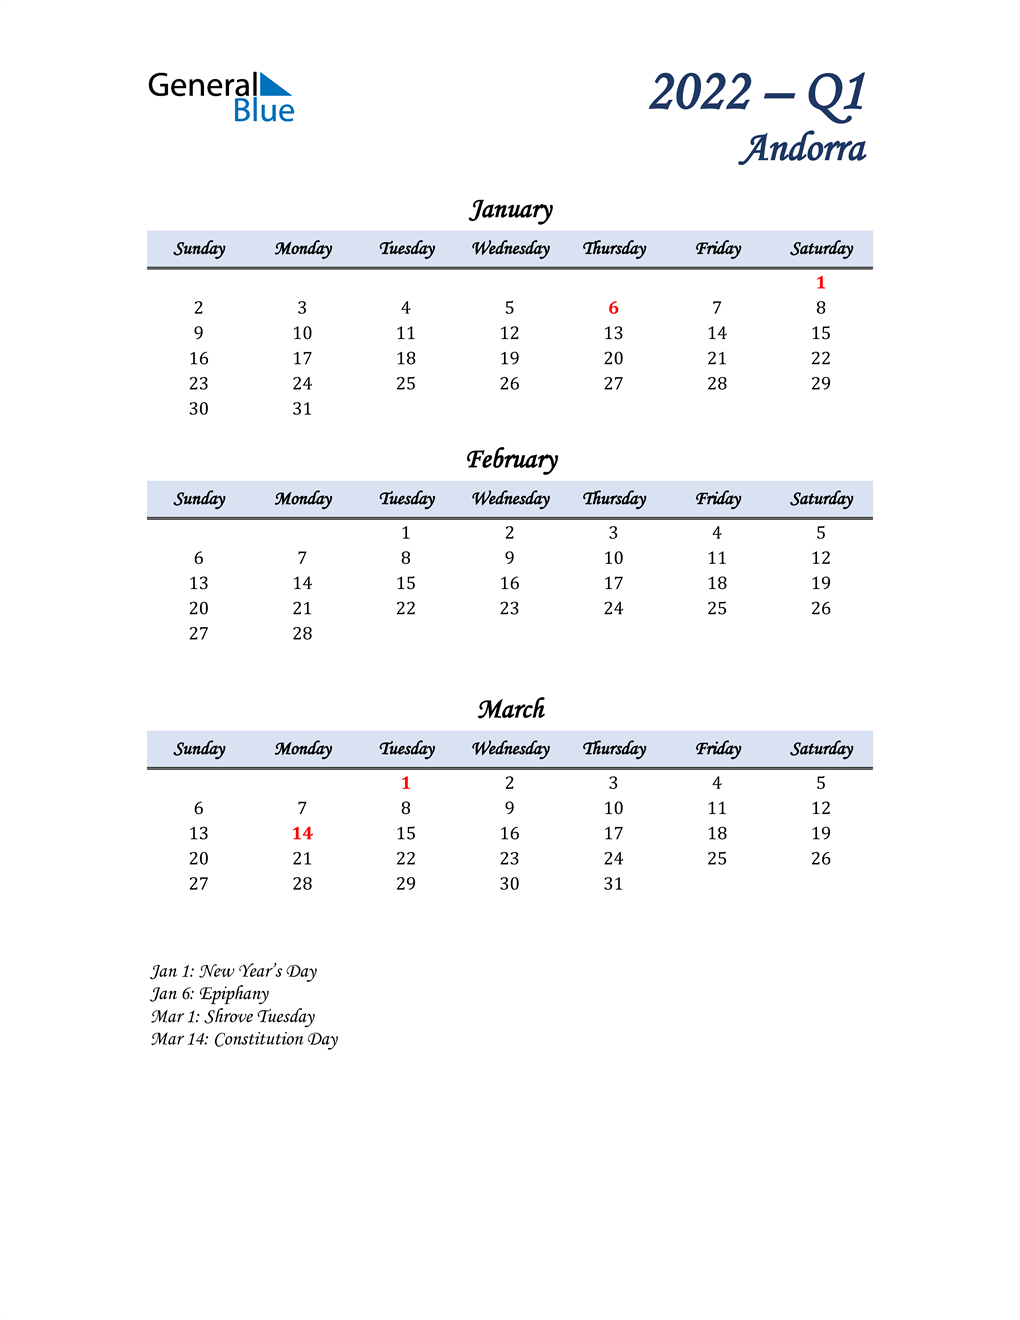  January, February, and March Calendar for Andorra